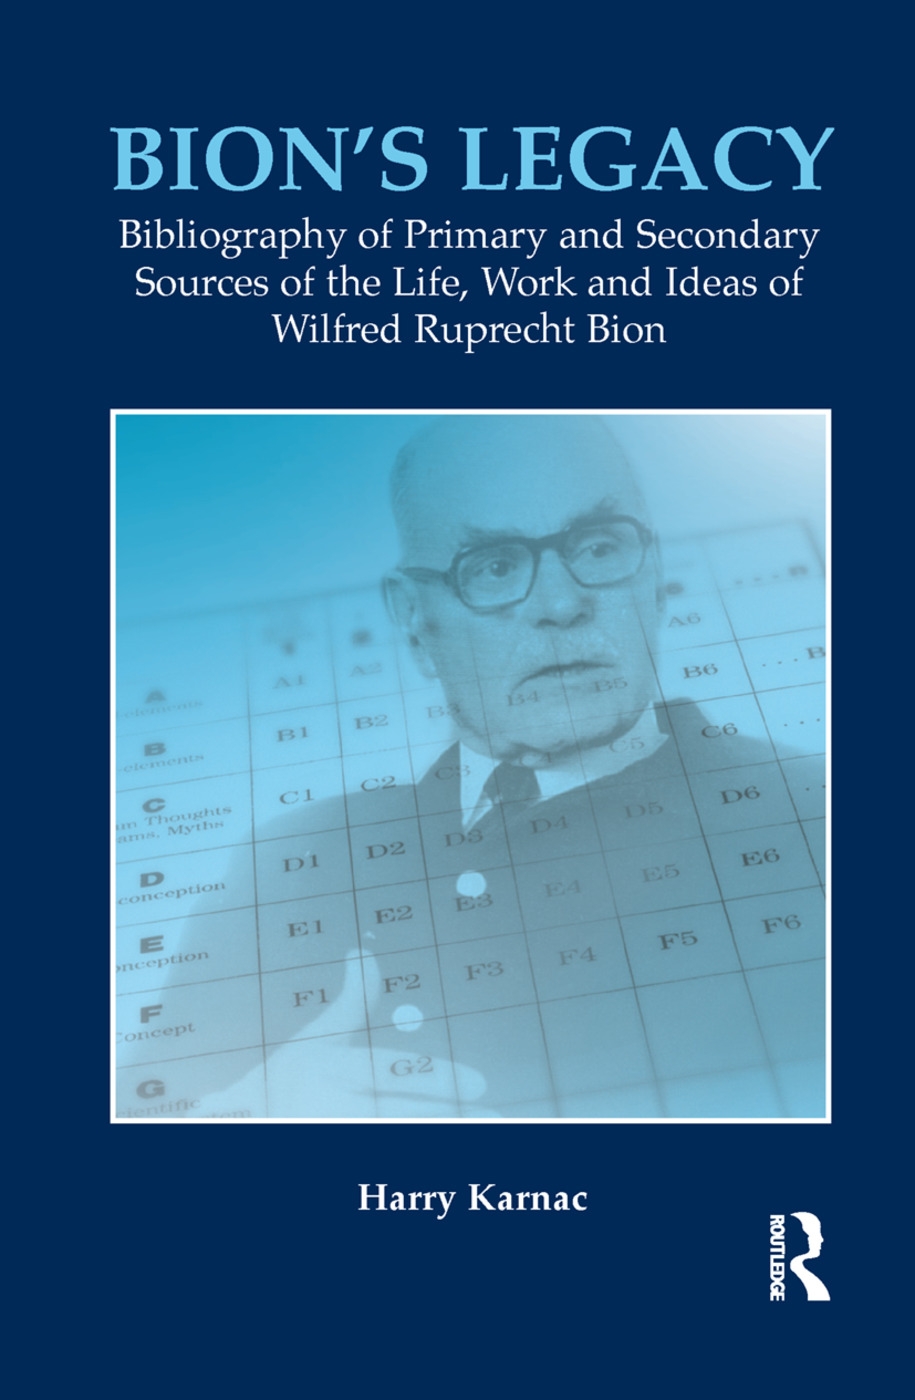 Bion’s Legacy: Bibliography of Primary and Secondary Sources of the Life, Work and Ideas of Wilfred Ruprecht Bion